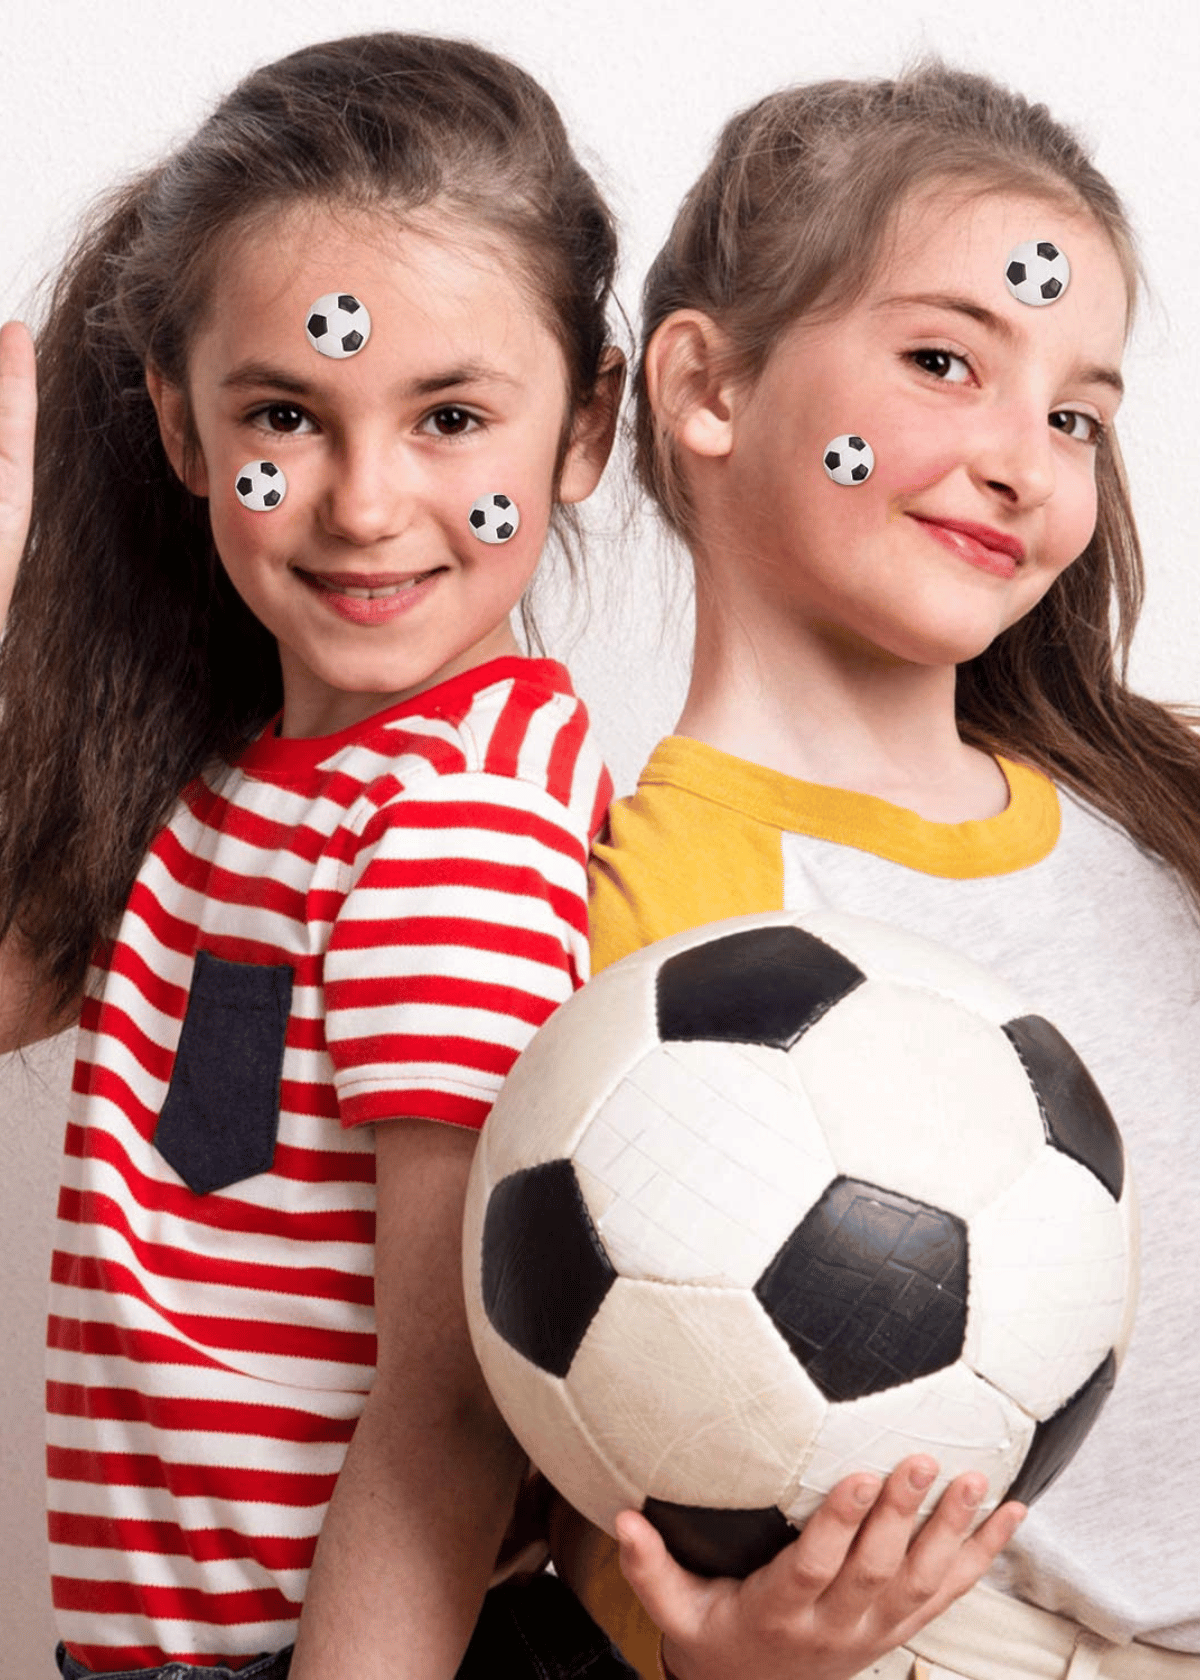 Soccer Frenzy:  Soccer Stickers to Show Your Team Spirit